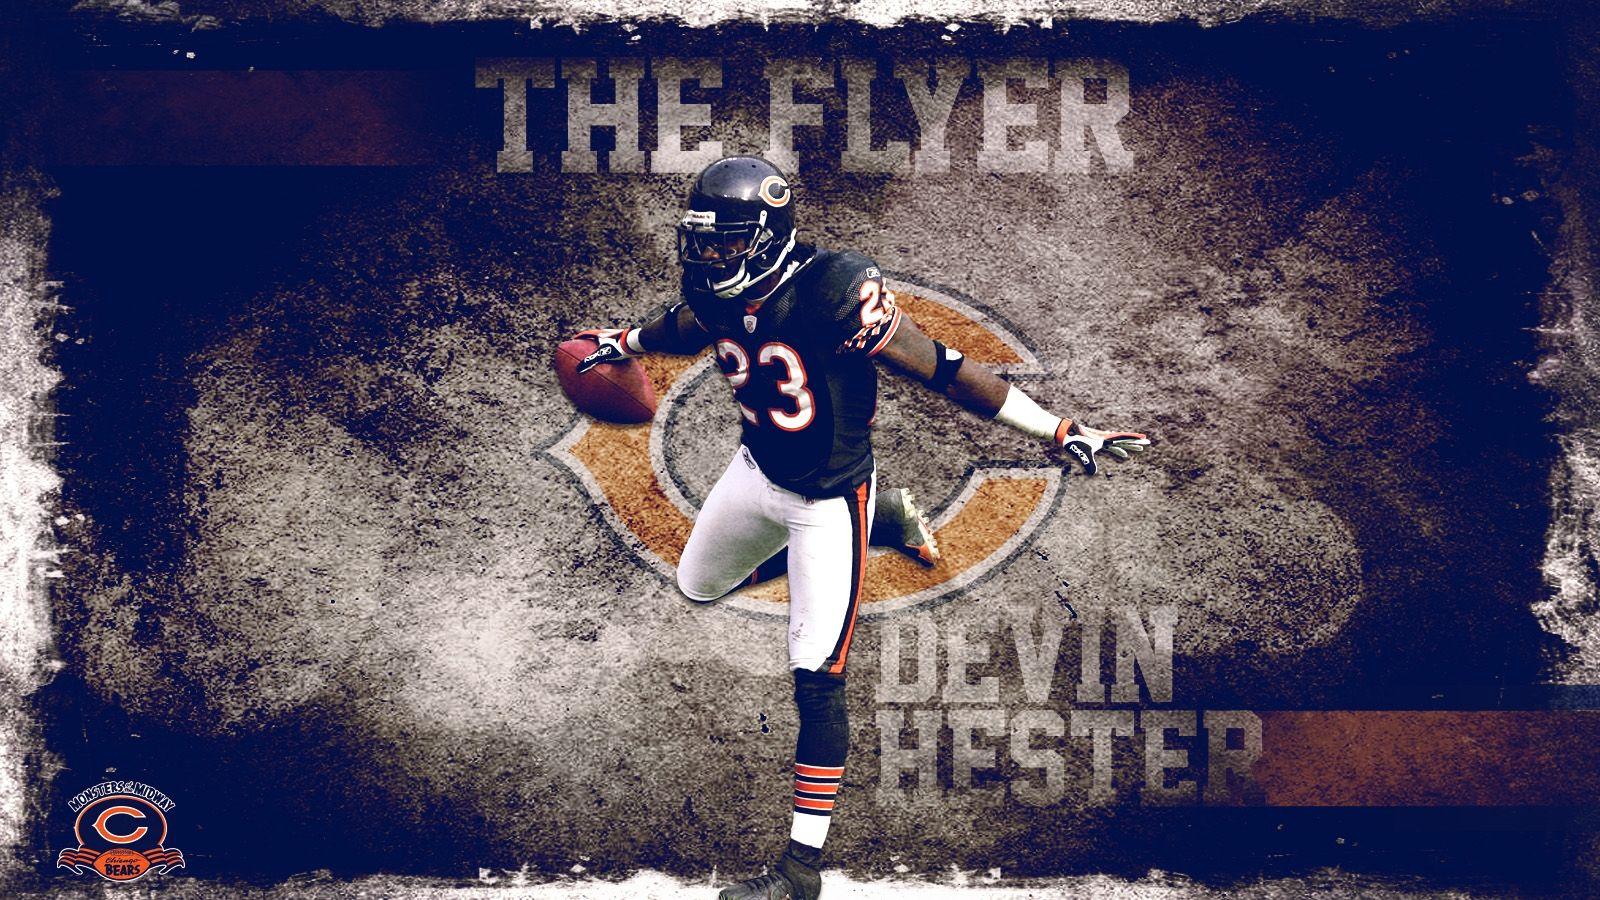 Devin Hester Wallpaper. Best Image Collections HD For Gadget